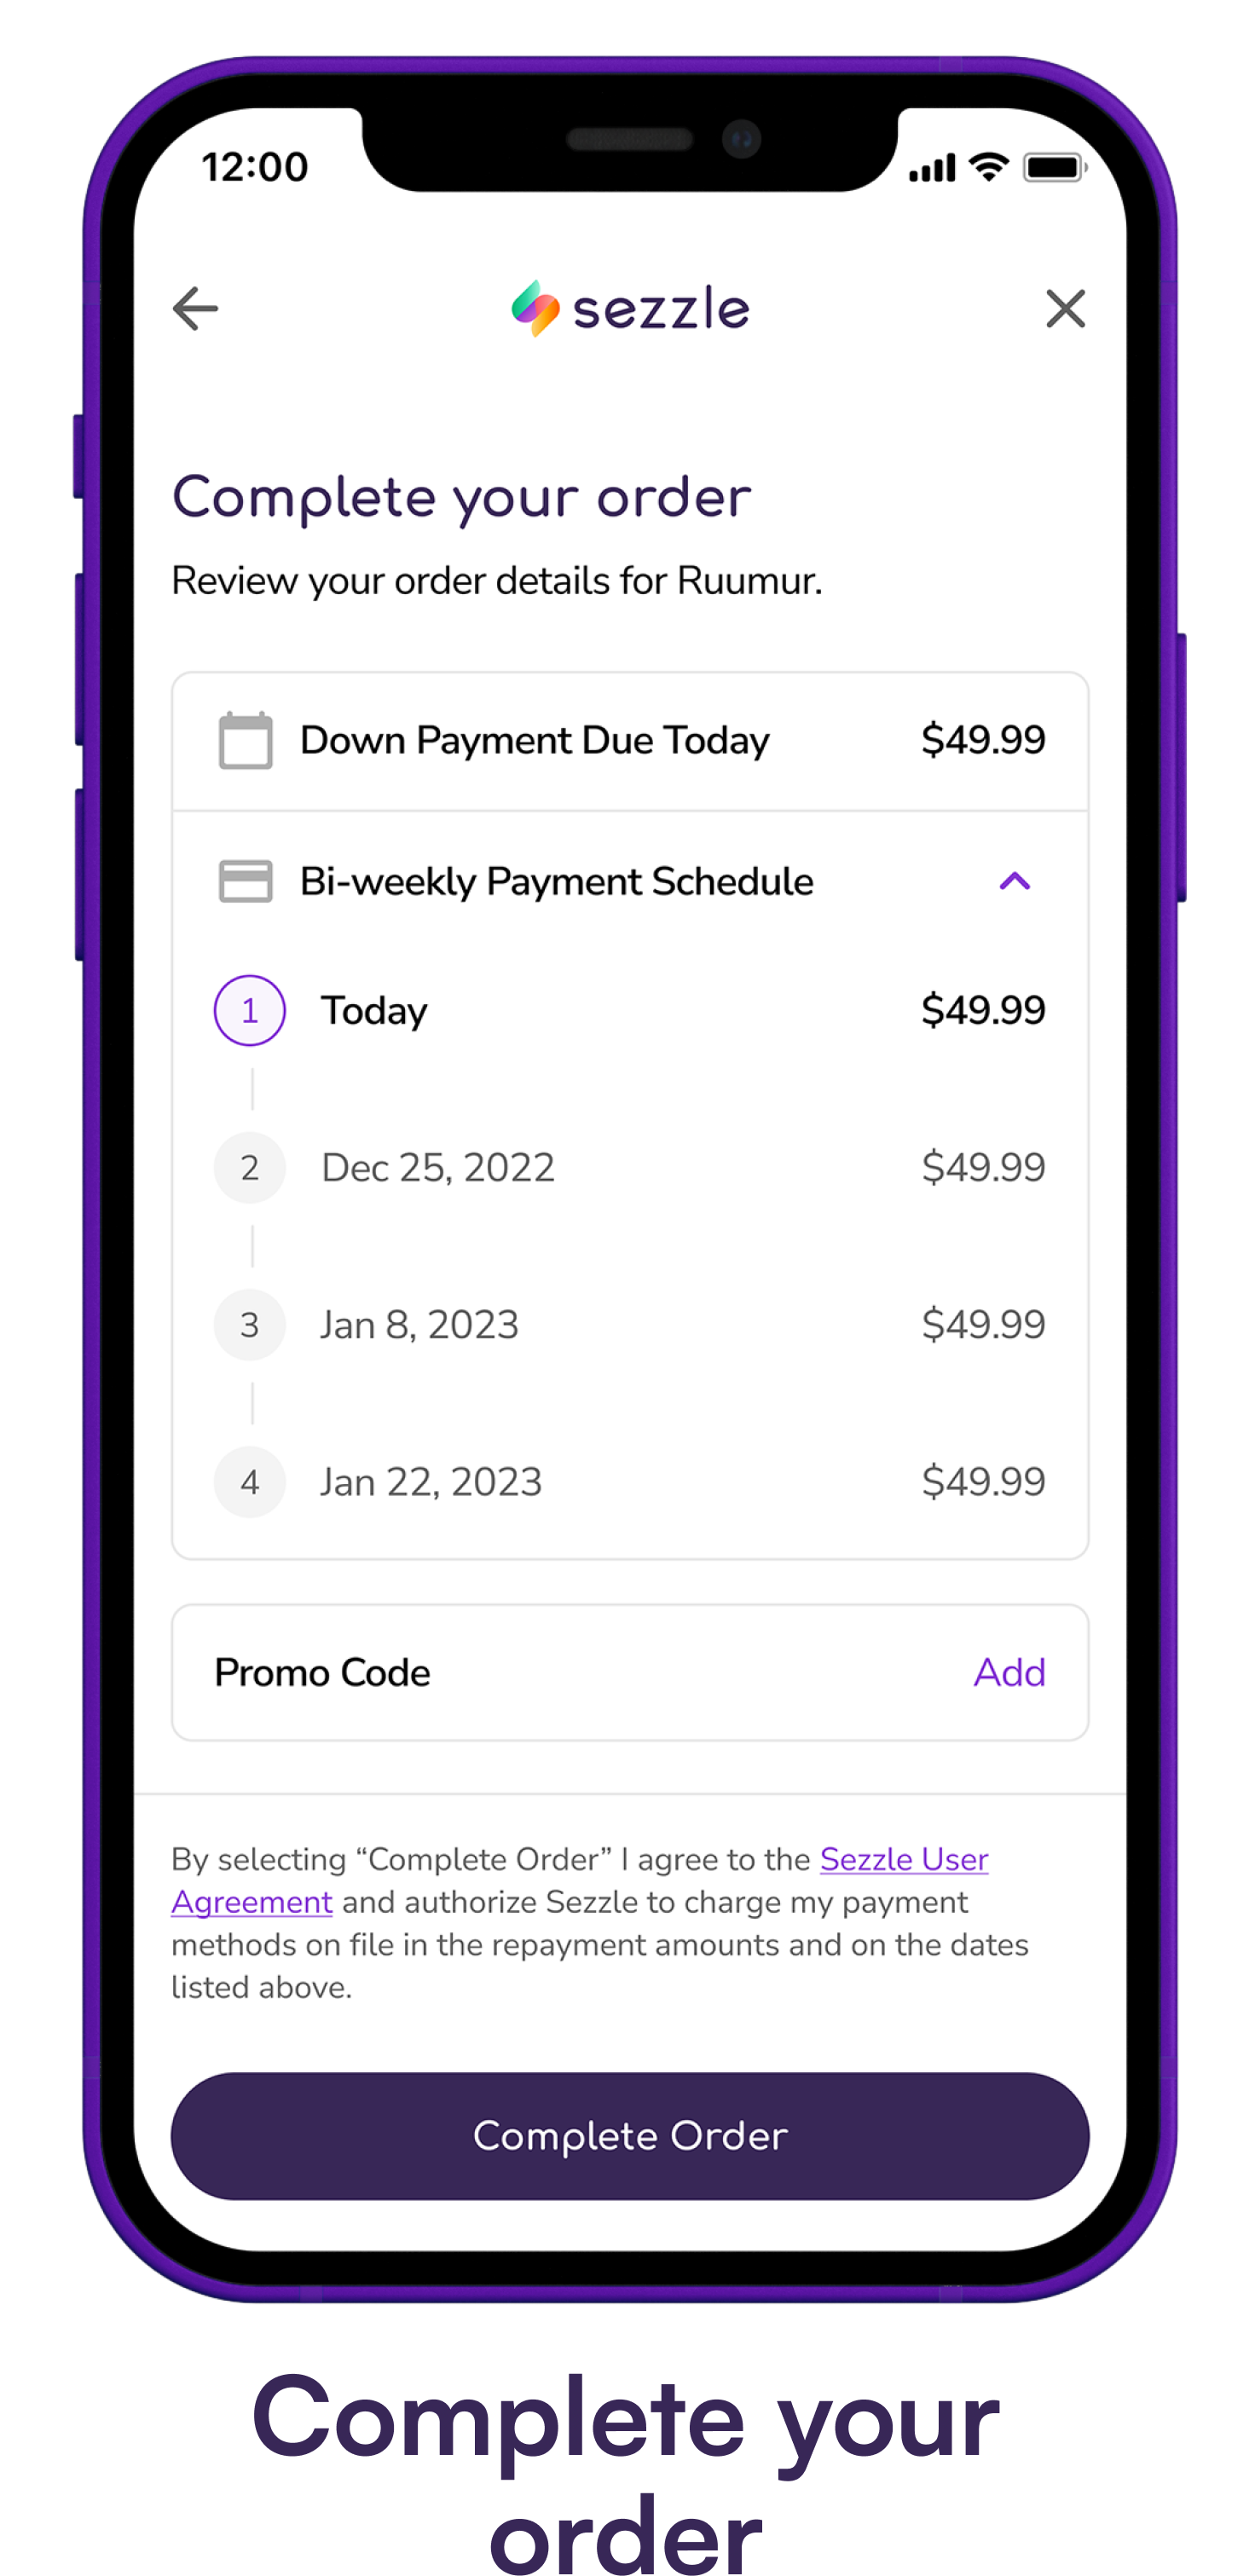 Phone screen showing the pay in 4 payment schedule and complete order screen